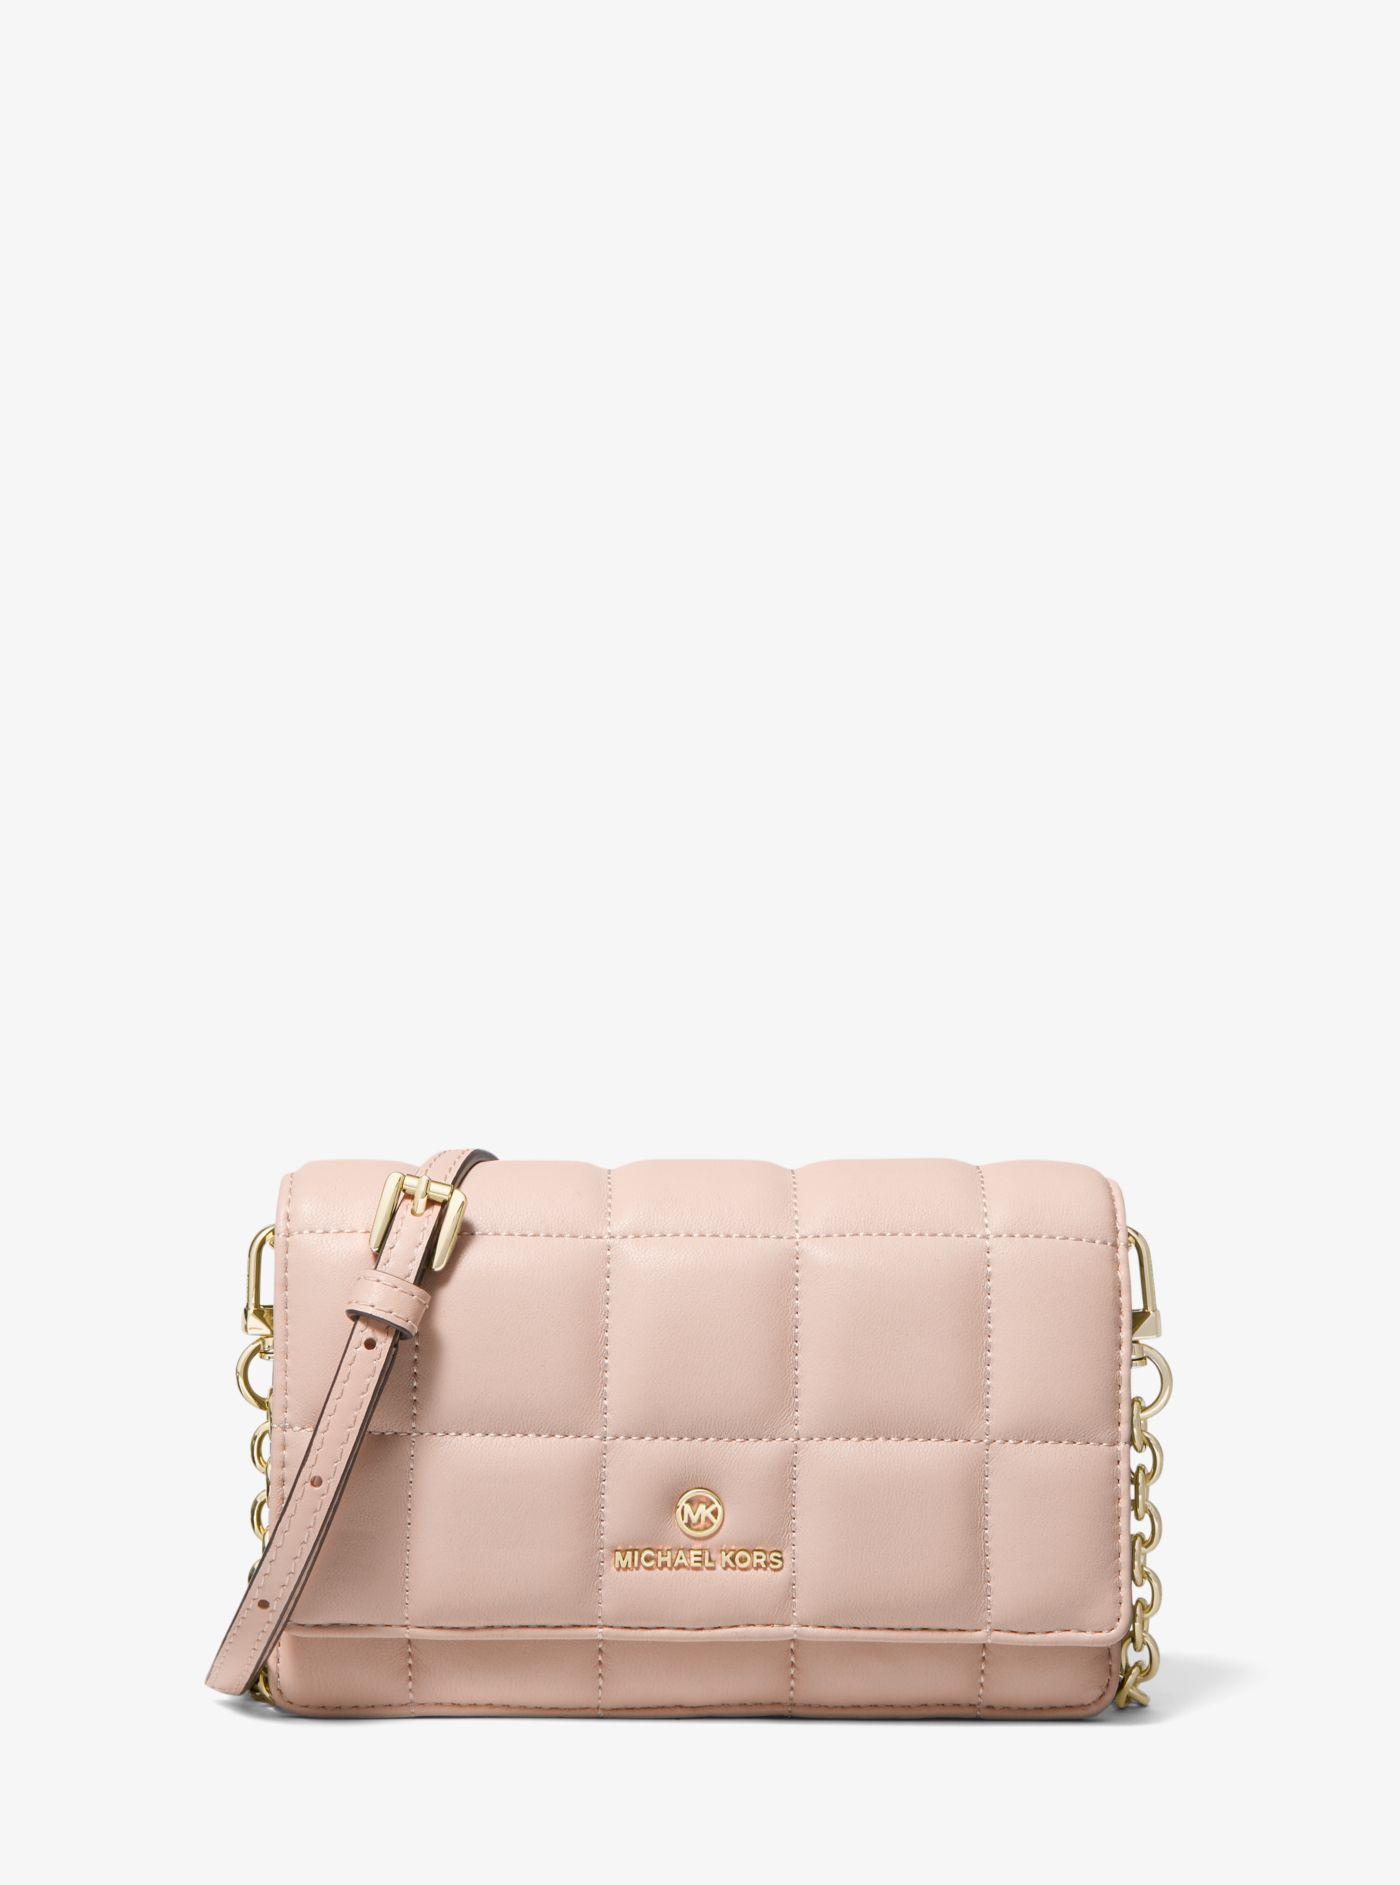 Michael Kors Small Quilted Leather Smartphone Crossbody Bag in Soft Pink  (Pink) | Lyst